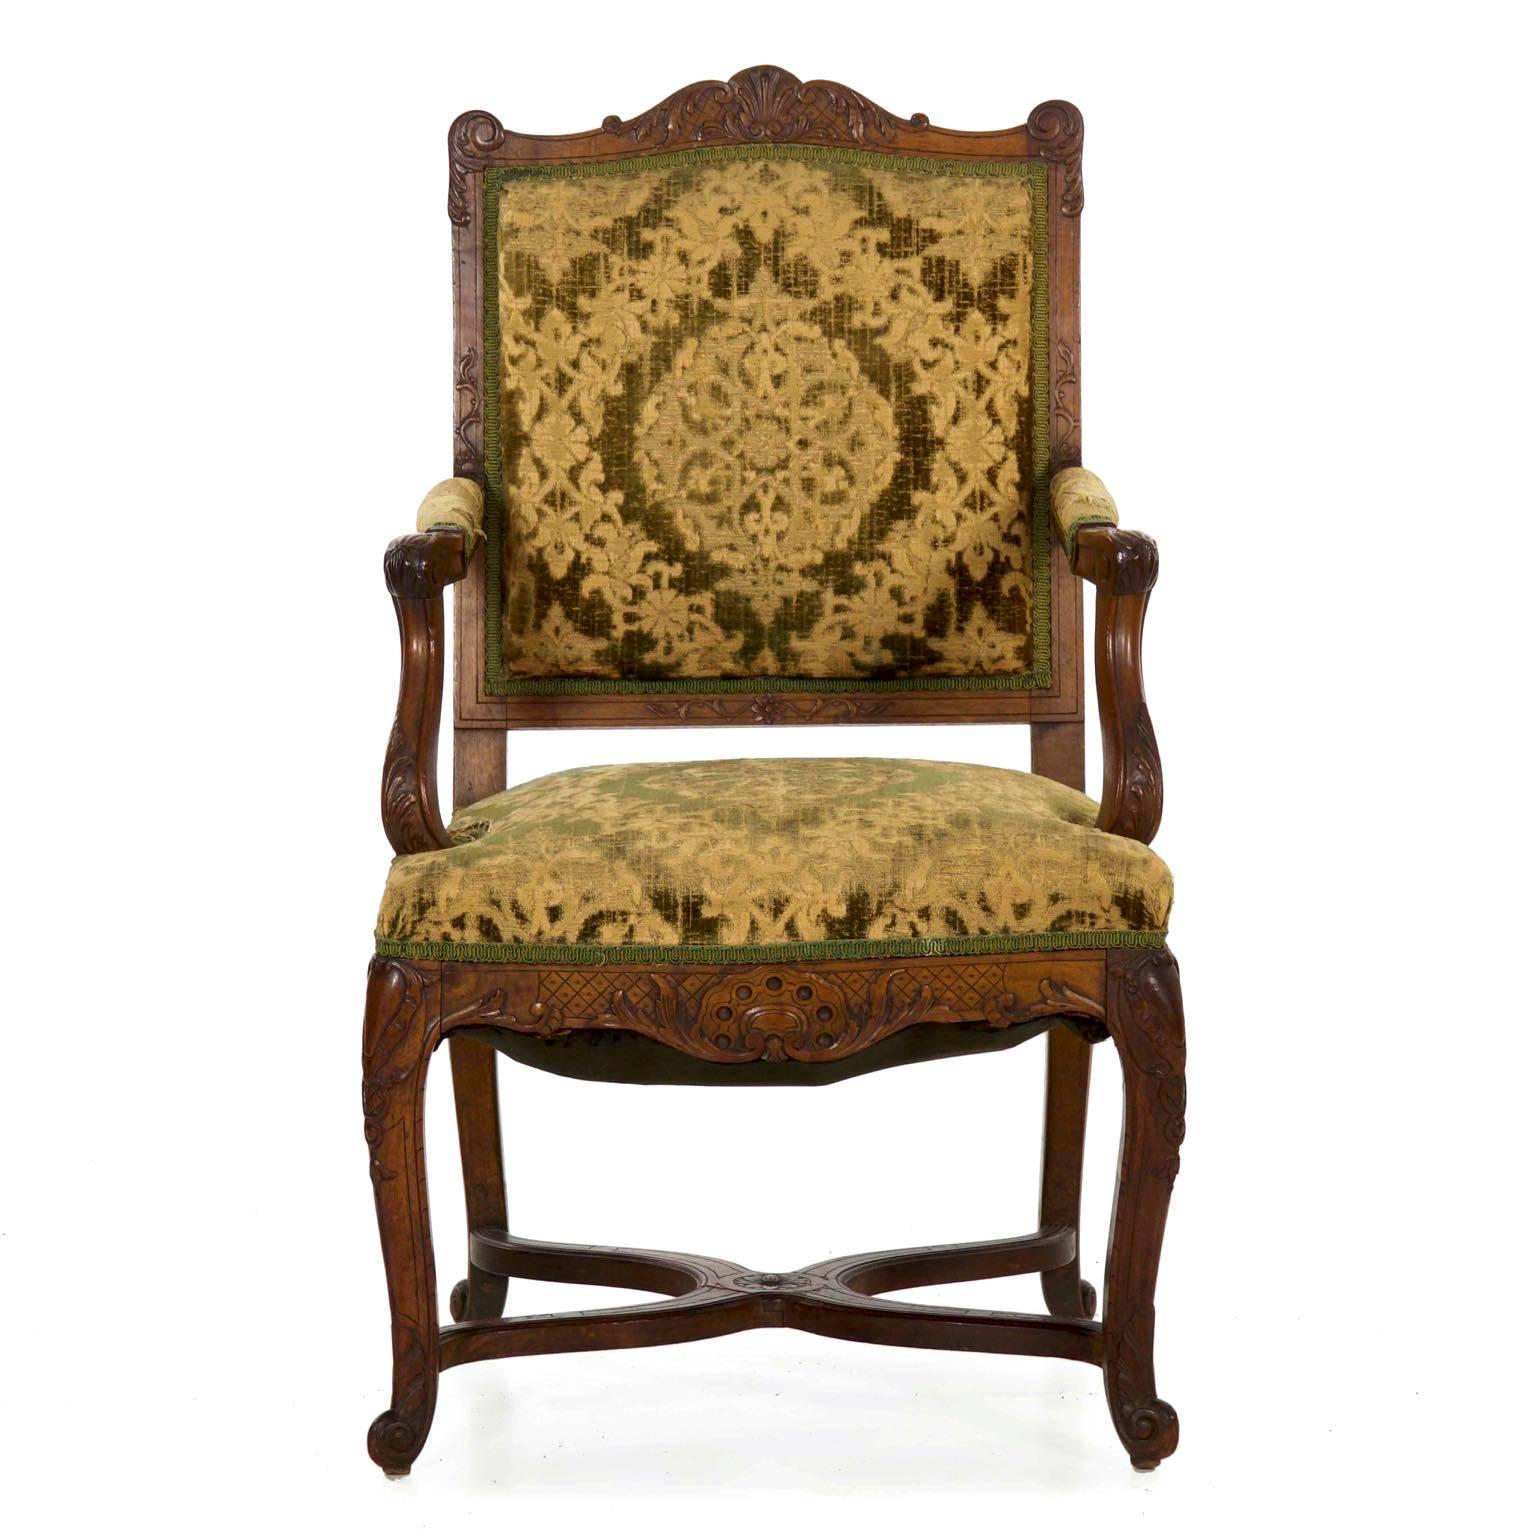 A fine chair with a crisp carved surface that retains an old finish in the rich patinated walnut wood throughout, this was crafted during the second half of the 19th century and has a delightful glow where handling has burnished the finish into a